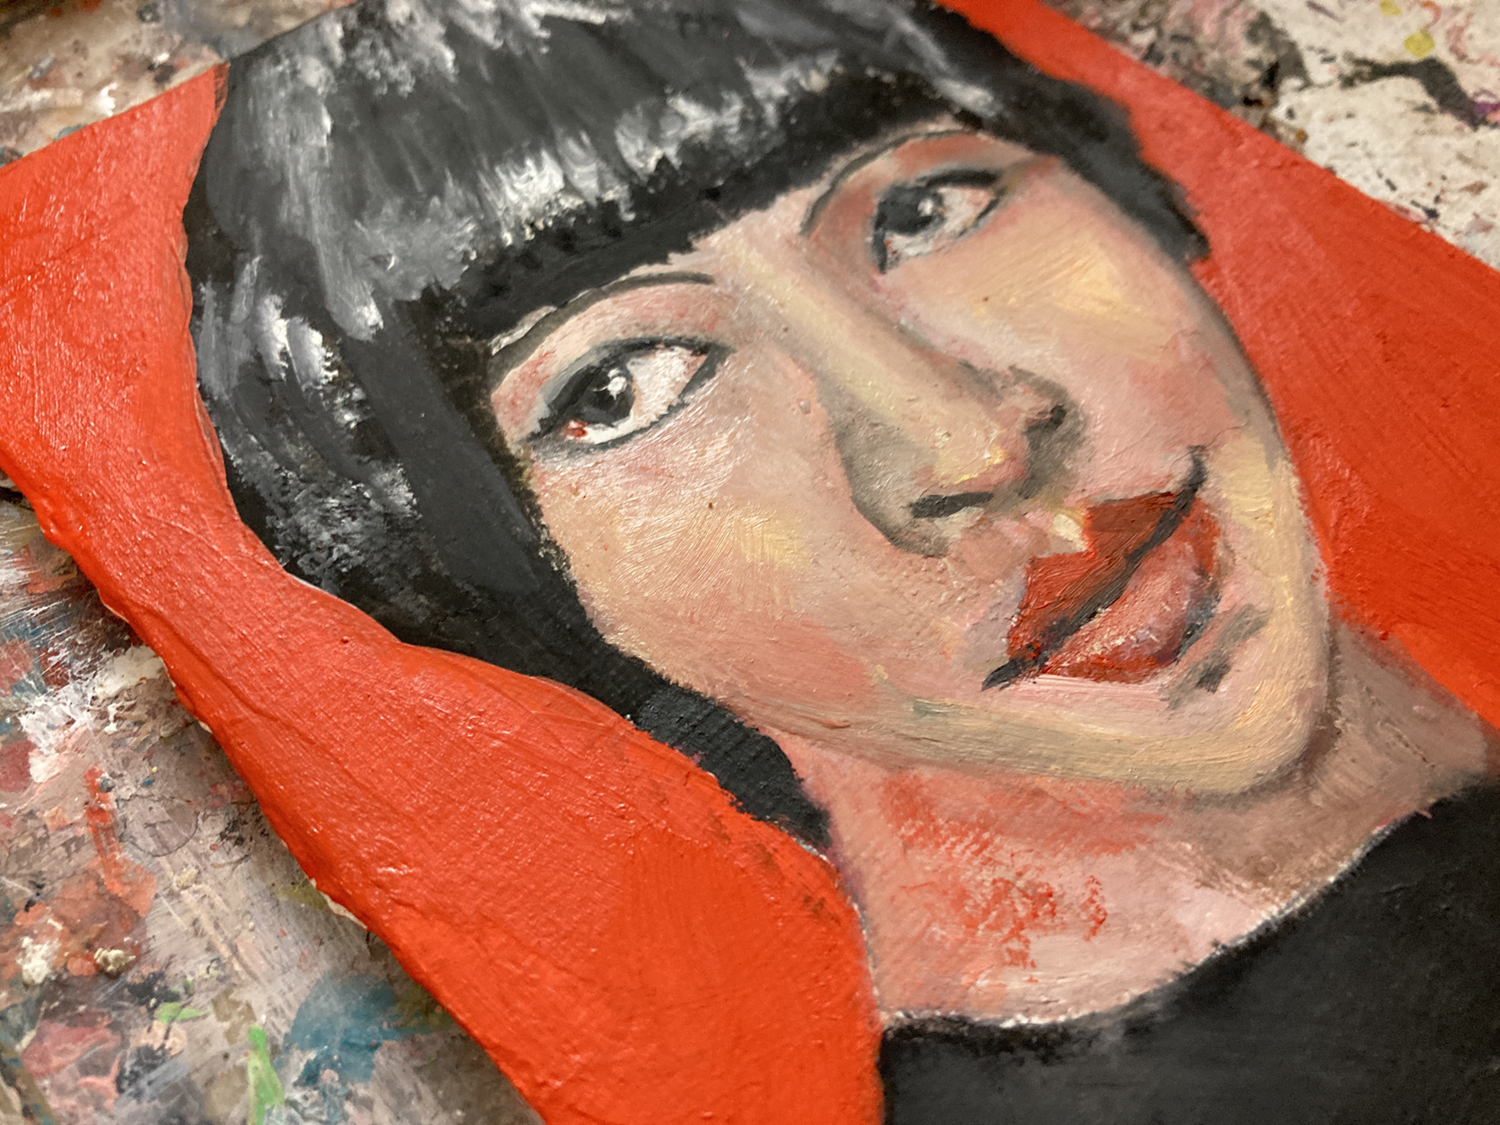 Katie Jeanne Wood - Anna May Wong oil portrait painting 